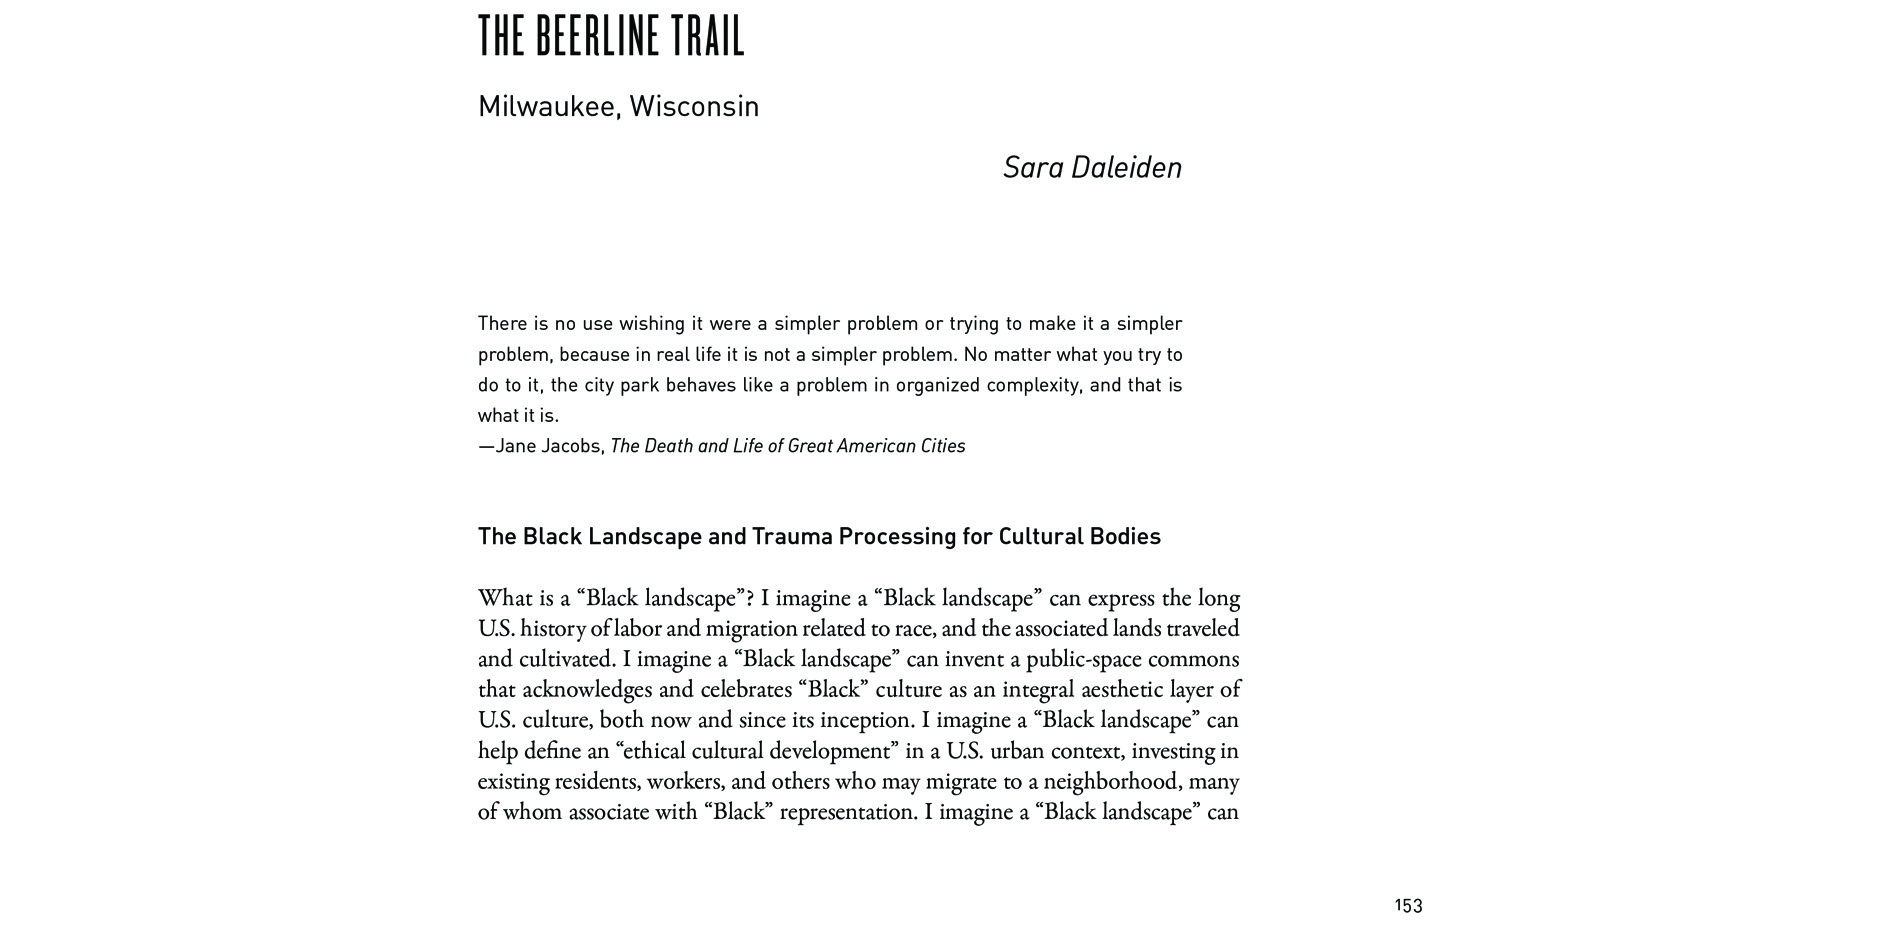 Black Landscapes Matter, The Beerline Trail: Milwaukee, Wisconsin (pg. 153)